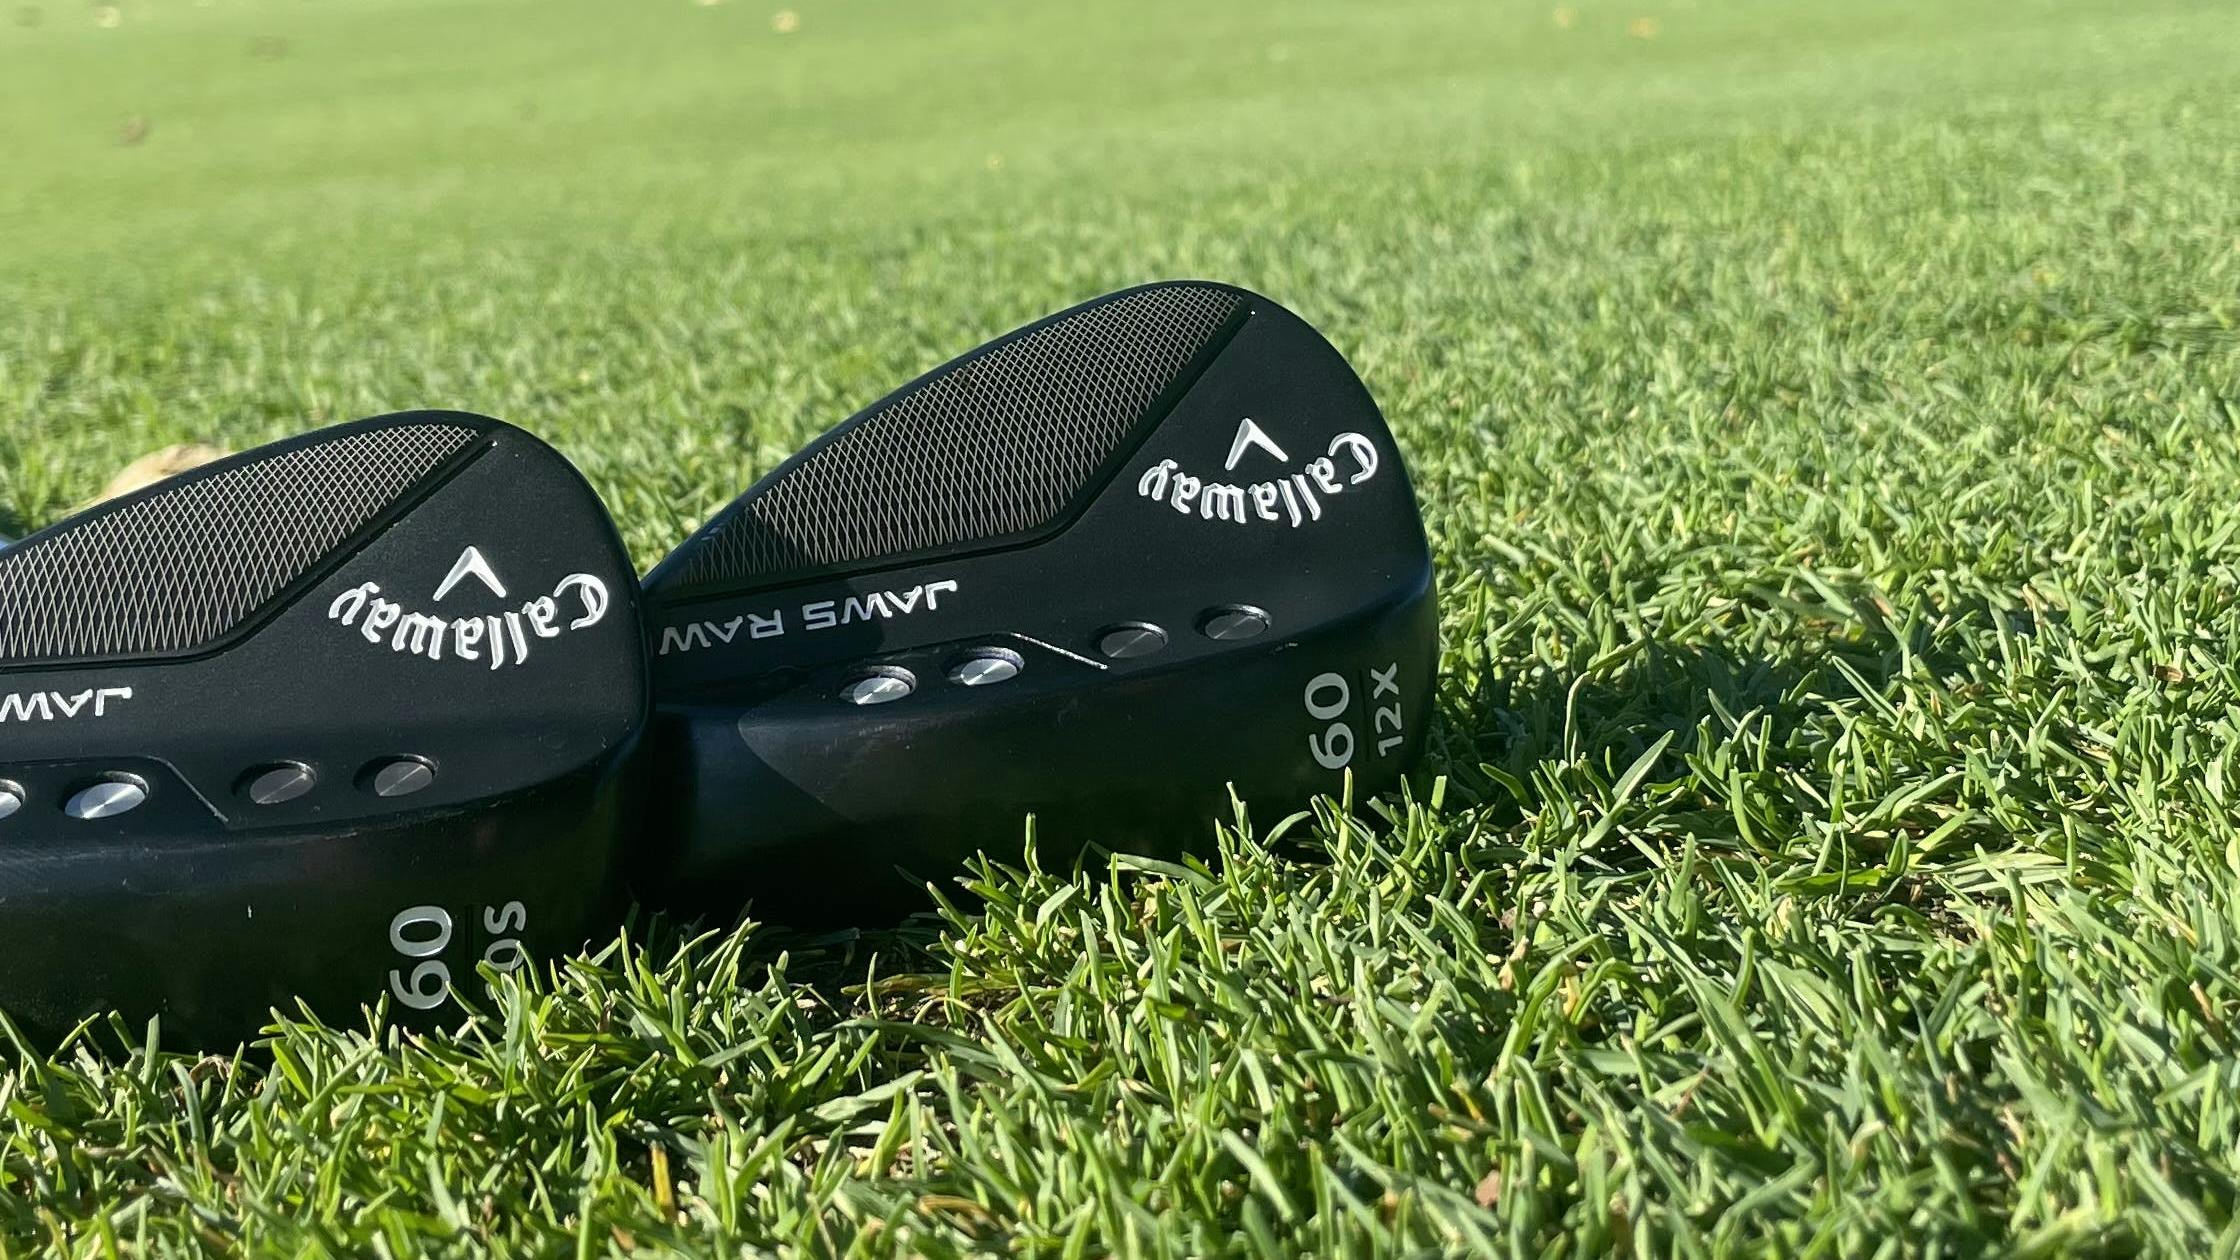 Two Callaway Golf Jaws Raw Plasma Black Wedges lying in the grass.